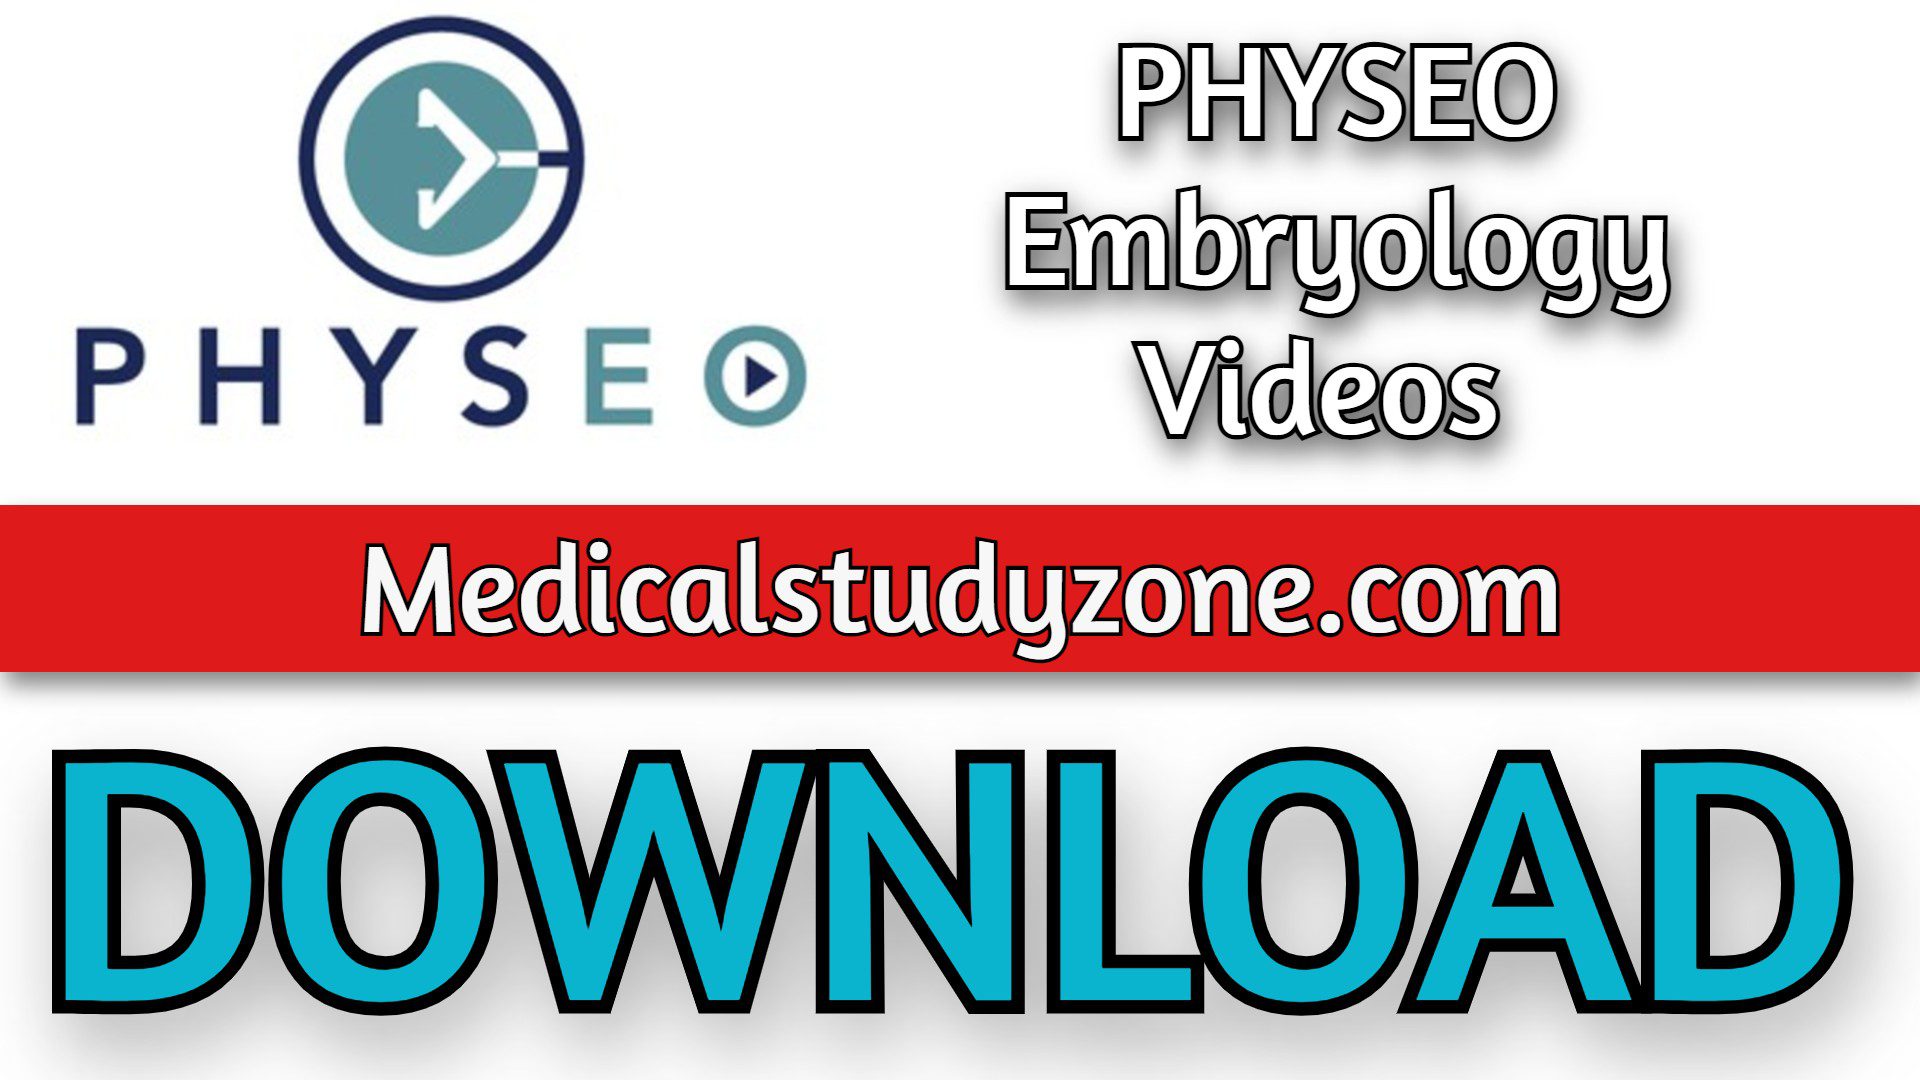 PHYSEO Embryology Videos 2022 Free Download